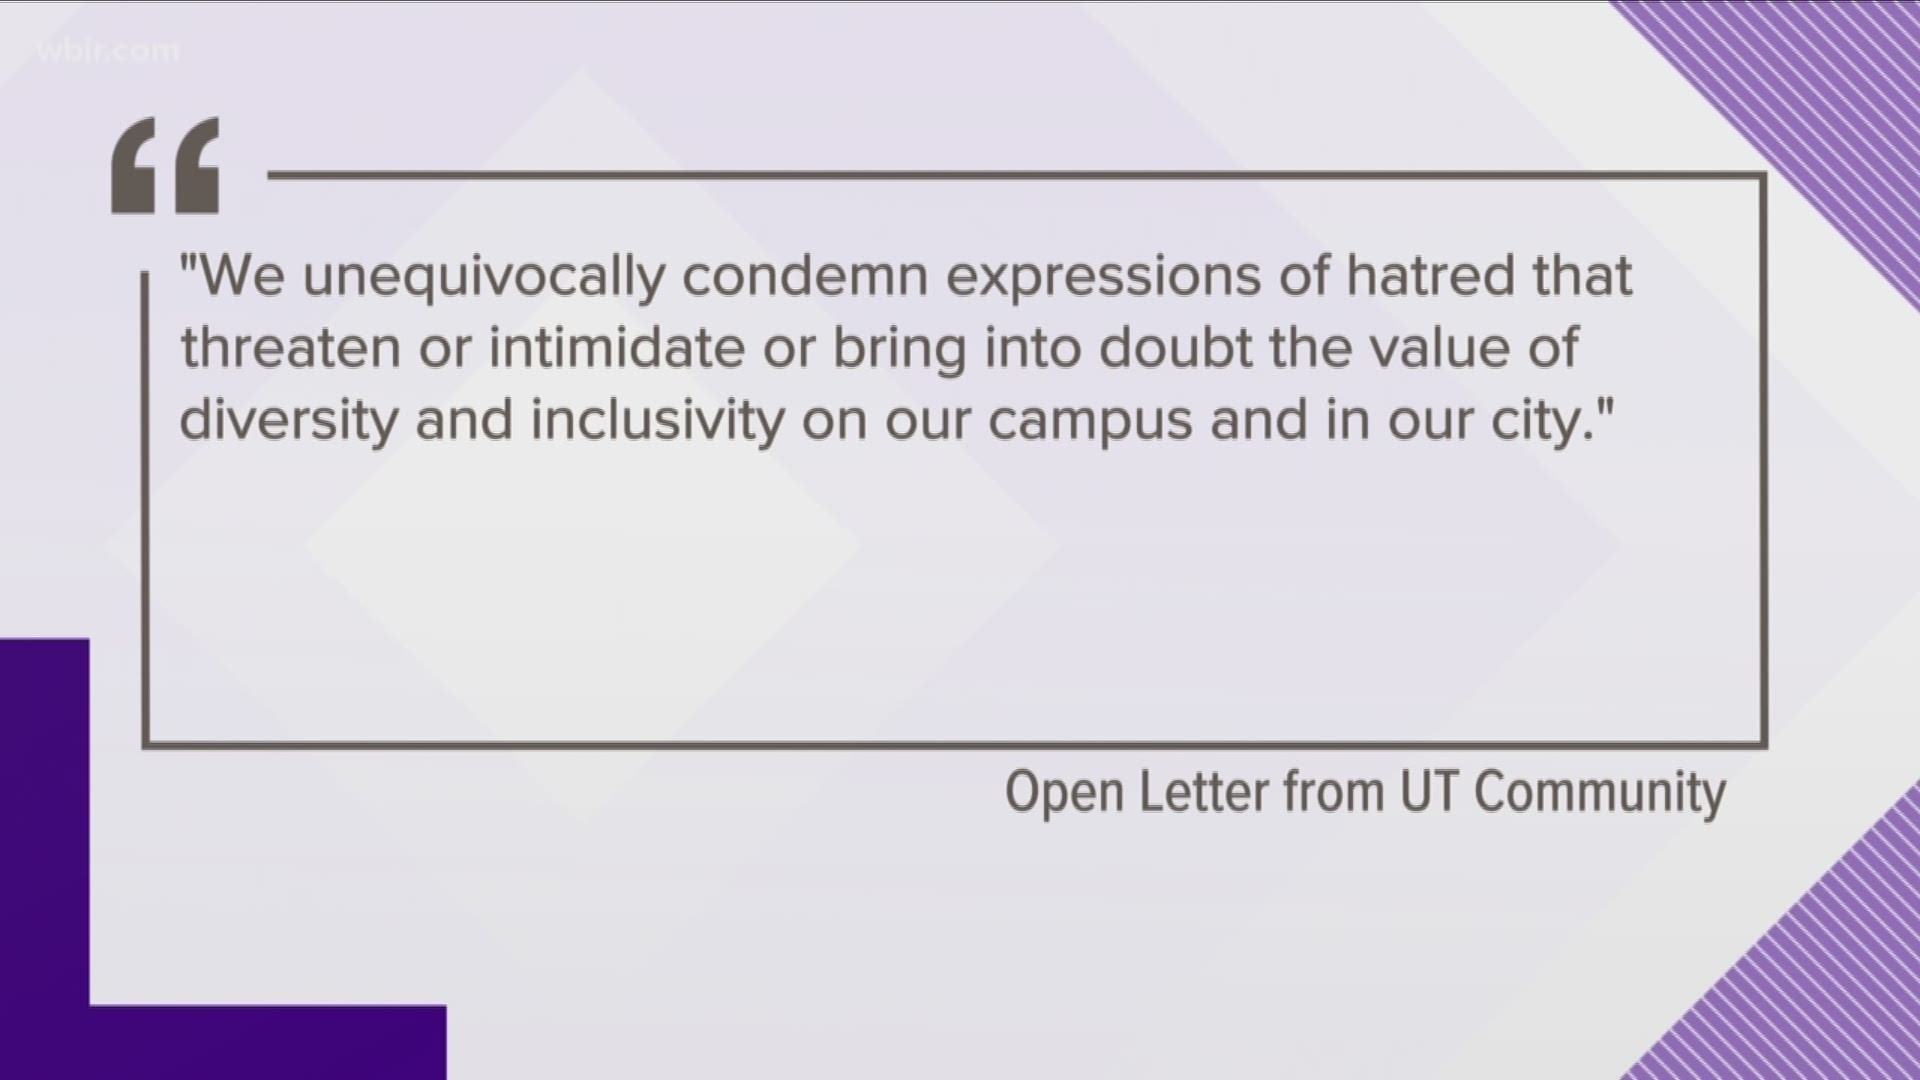 More than 400 UT faculty and staff members signed an open letter urging the administration to take further action after hate speech appeared on the rock earlier this month.